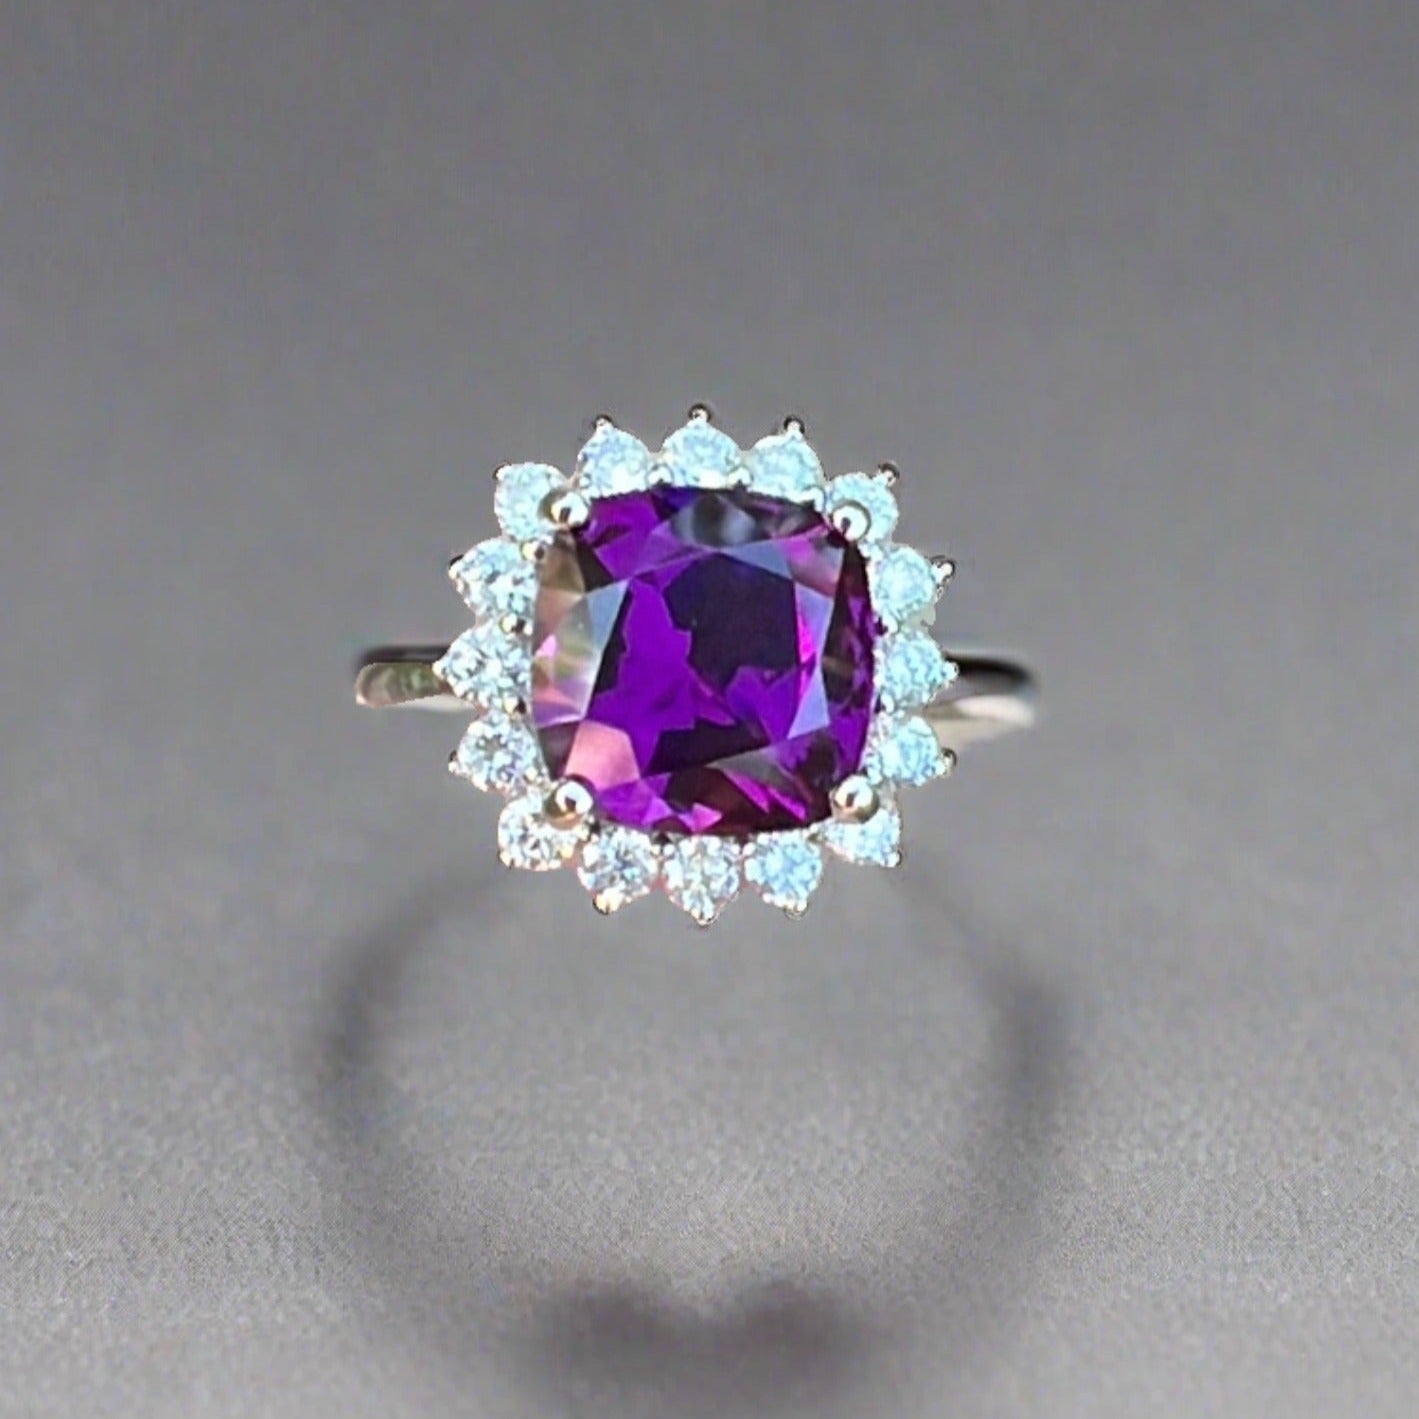 Royal purple grape garnet ring with a diamond halo set in 14k white gold with a grey background and a shadow